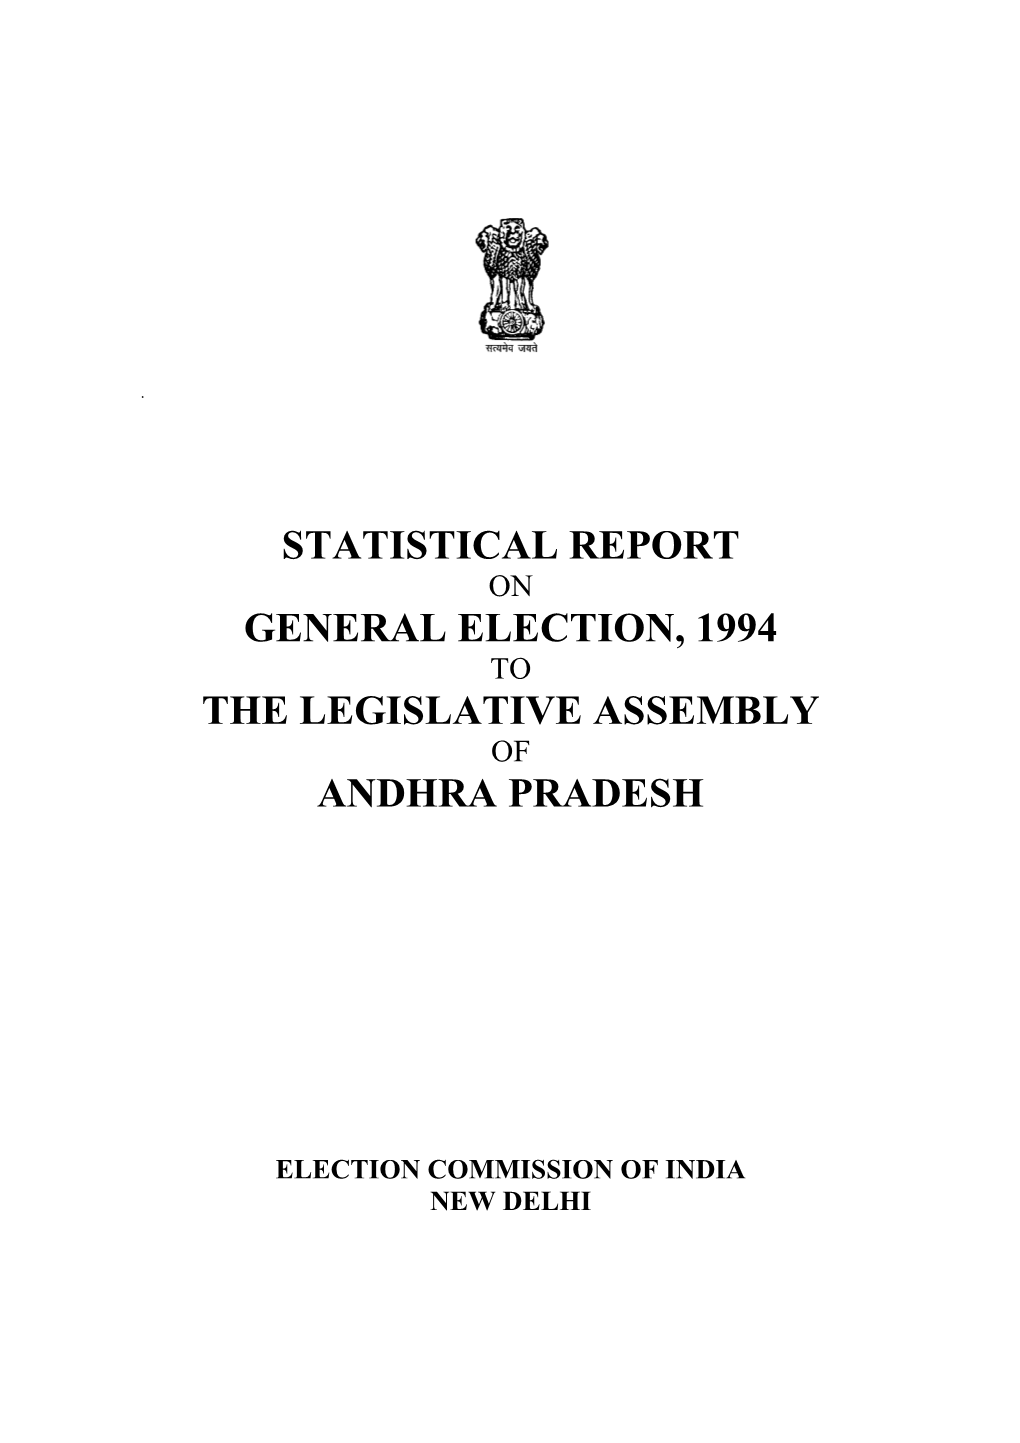 General Election, 1994 to the Legislative Assembly of Andhra Pradesh